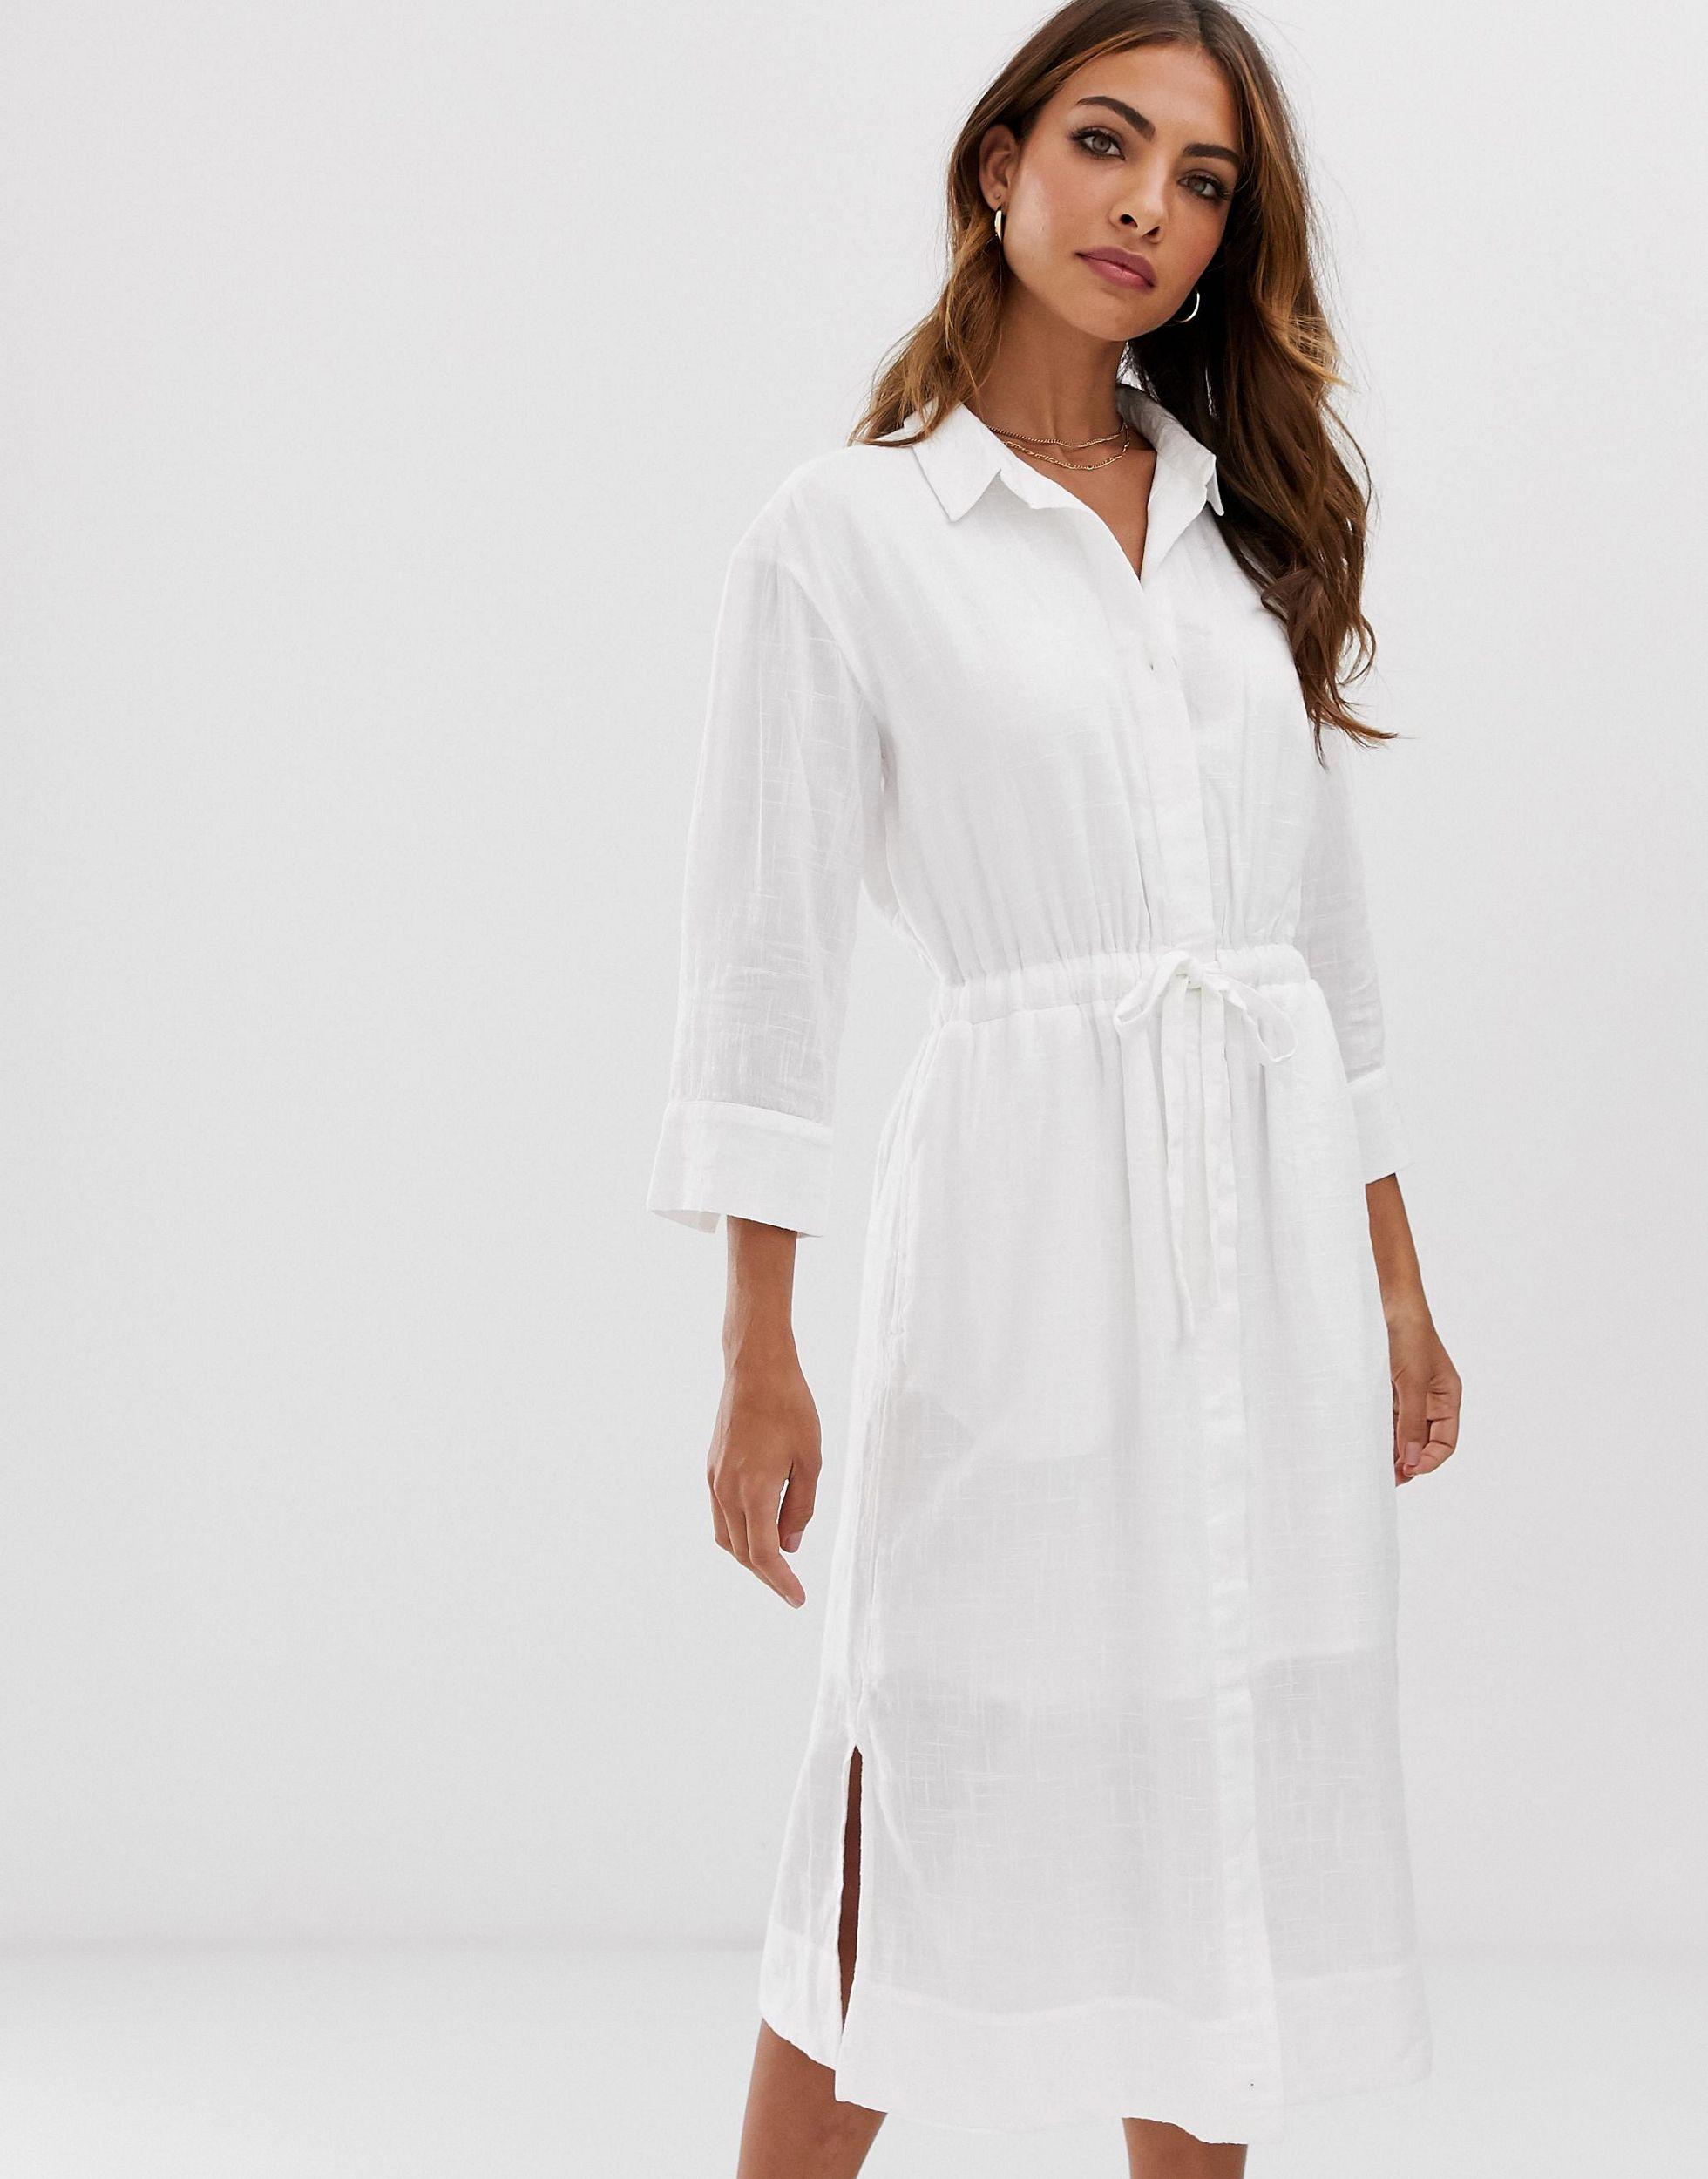 Esprit Leather Tie Waist Midi Shirt Dress With Side Slits in White - Lyst